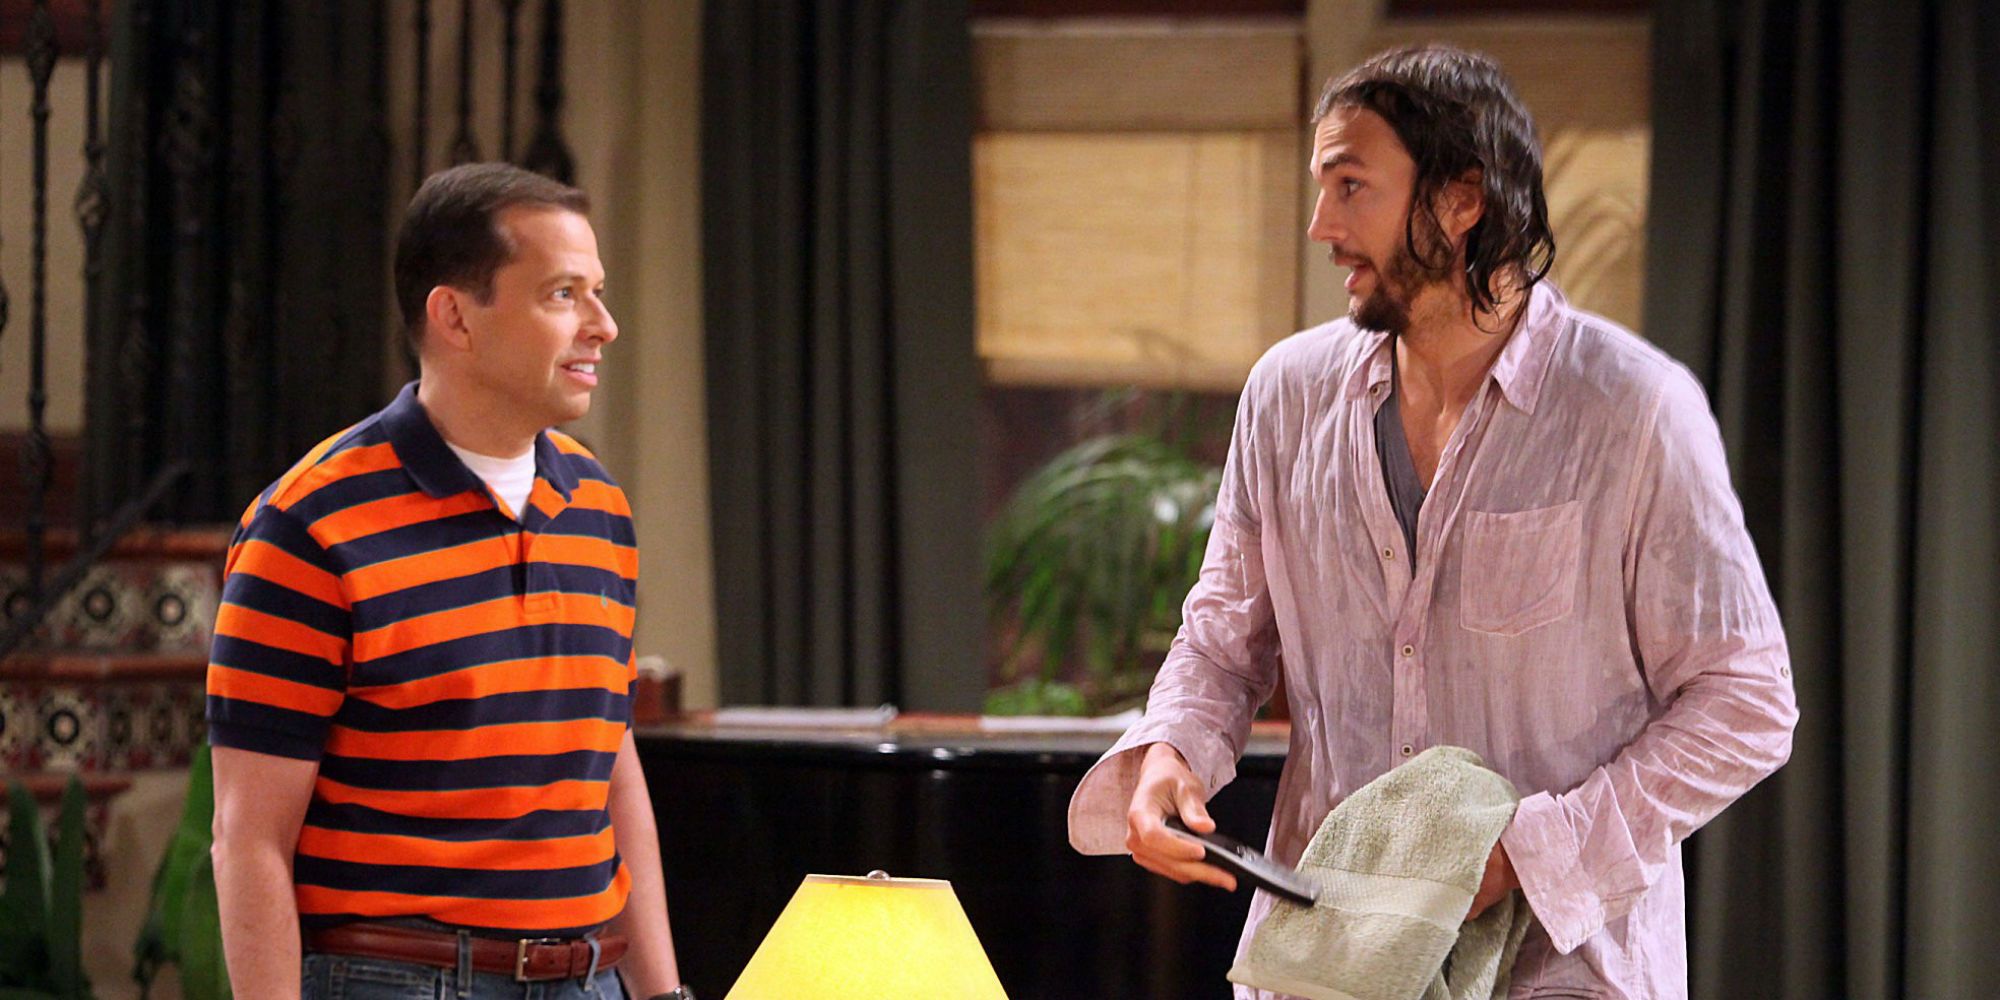 10 Shows To Watch If You Like The Big Bang Theory